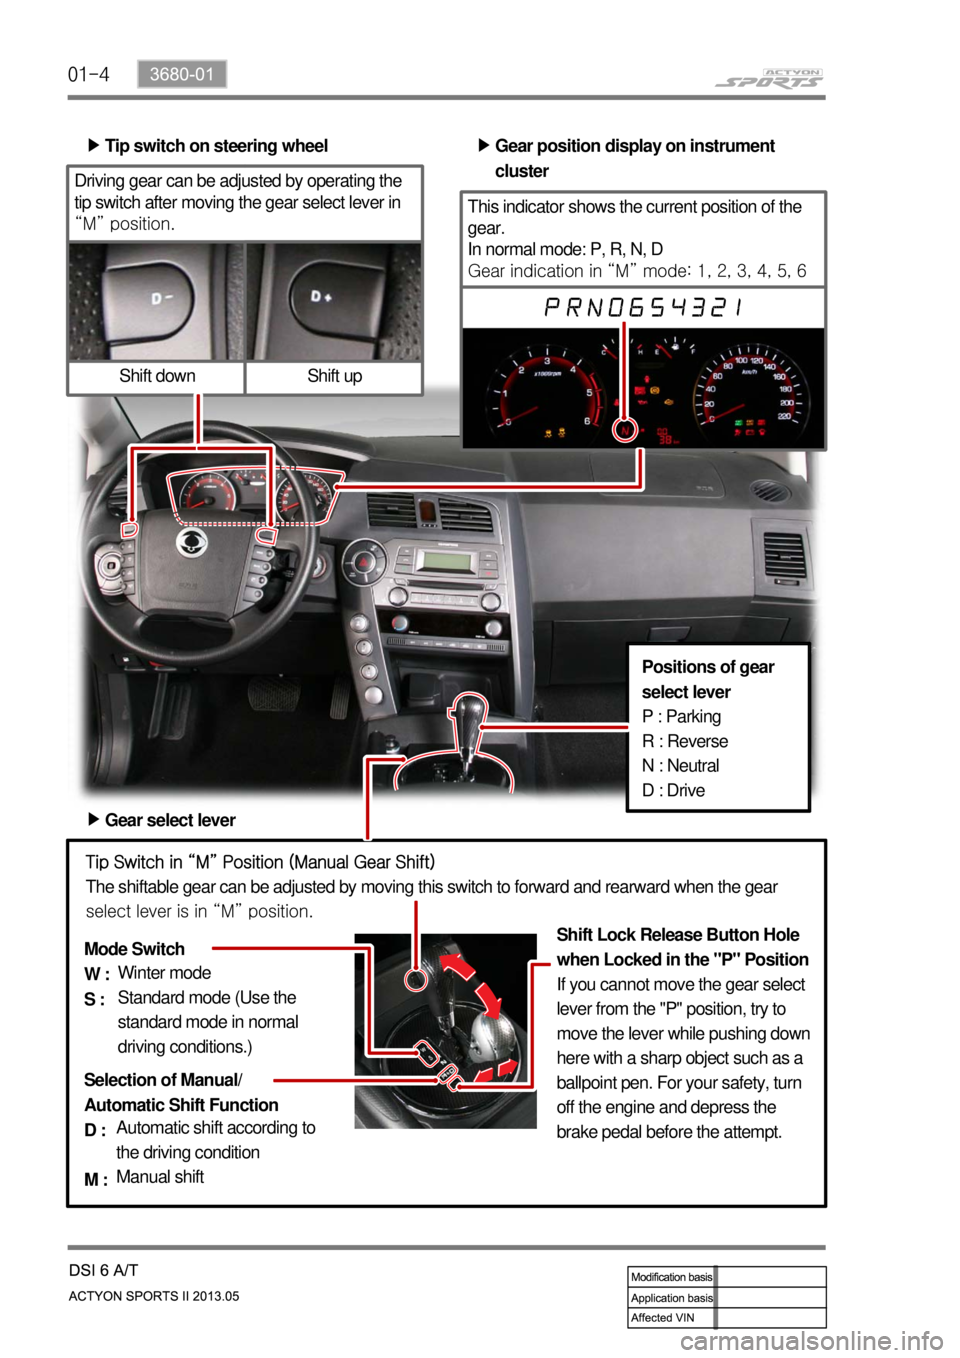 SSANGYONG NEW ACTYON SPORTS 2013 User Guide 01-4
This indicator shows the current position of the 
gear.
In normal mode: P, R, N, D
Gear indication in “M” mode: 1, 2, 3, 4, 5, 6
Driving gear can be adjusted by operating the 
tip switch afte